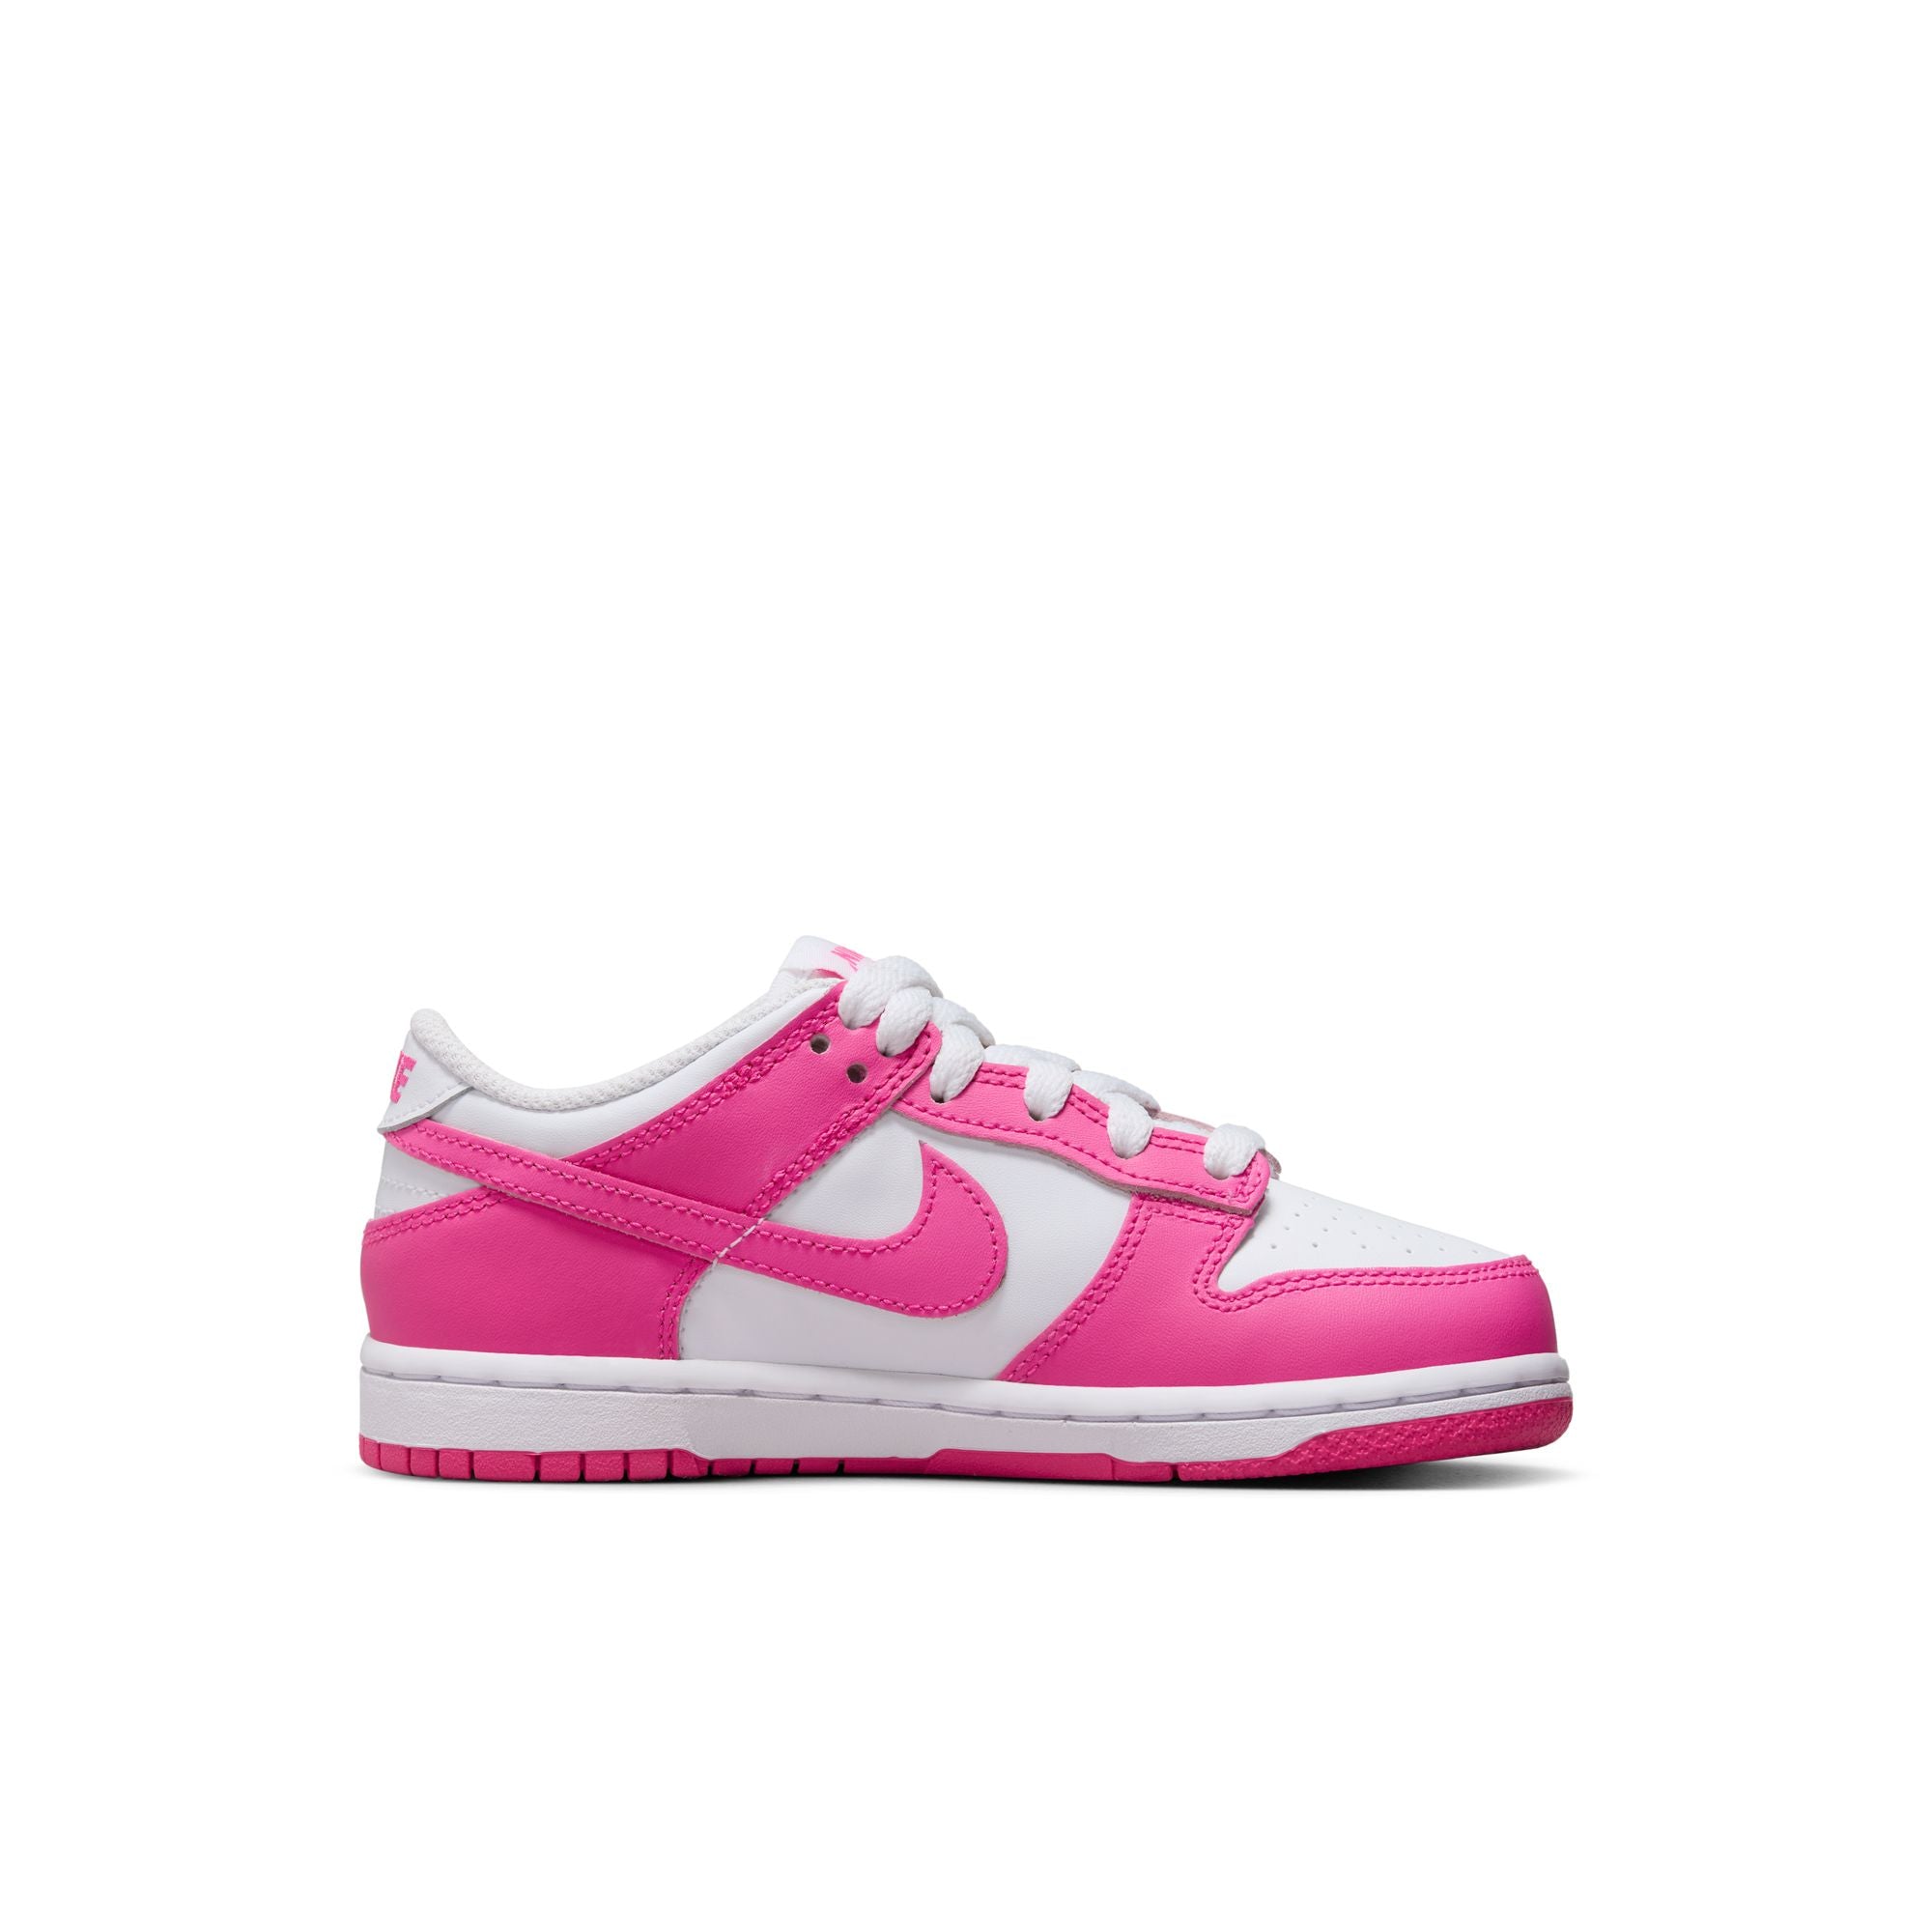 Nike Dunk Low (PS) Barbie